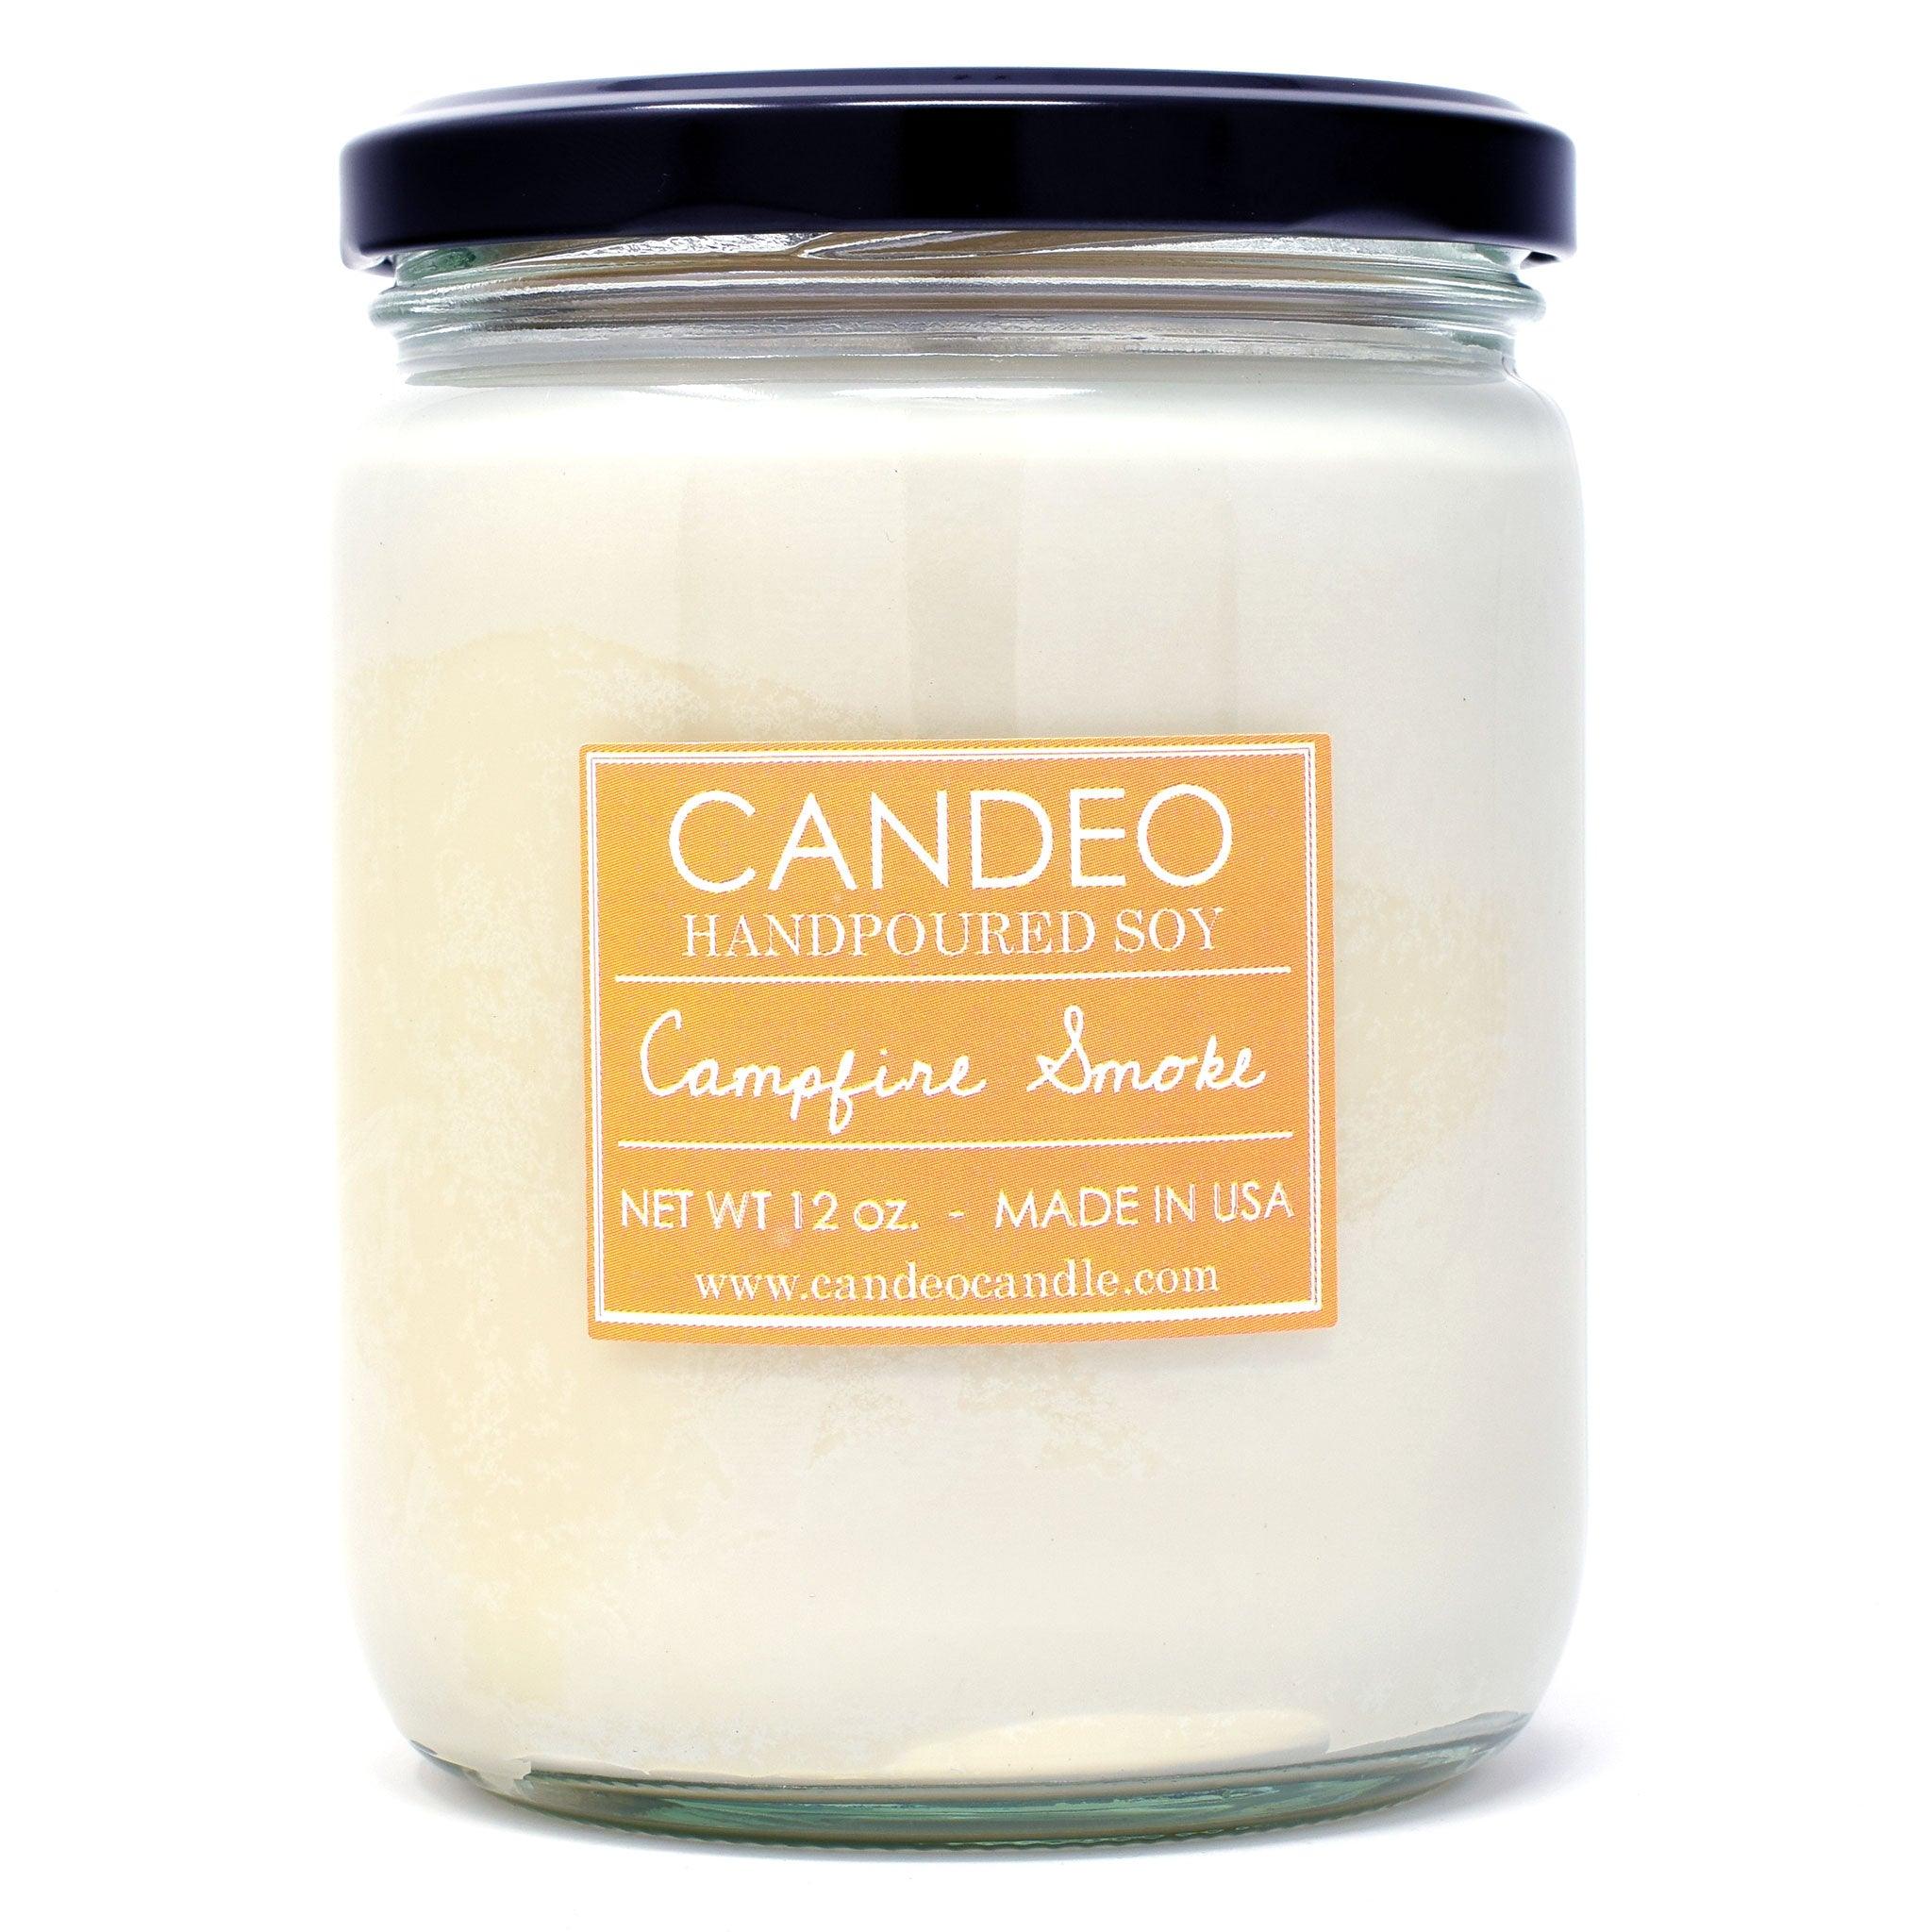 Campfire Smoke, 14oz Soy Candle Jar - Candeo Candle